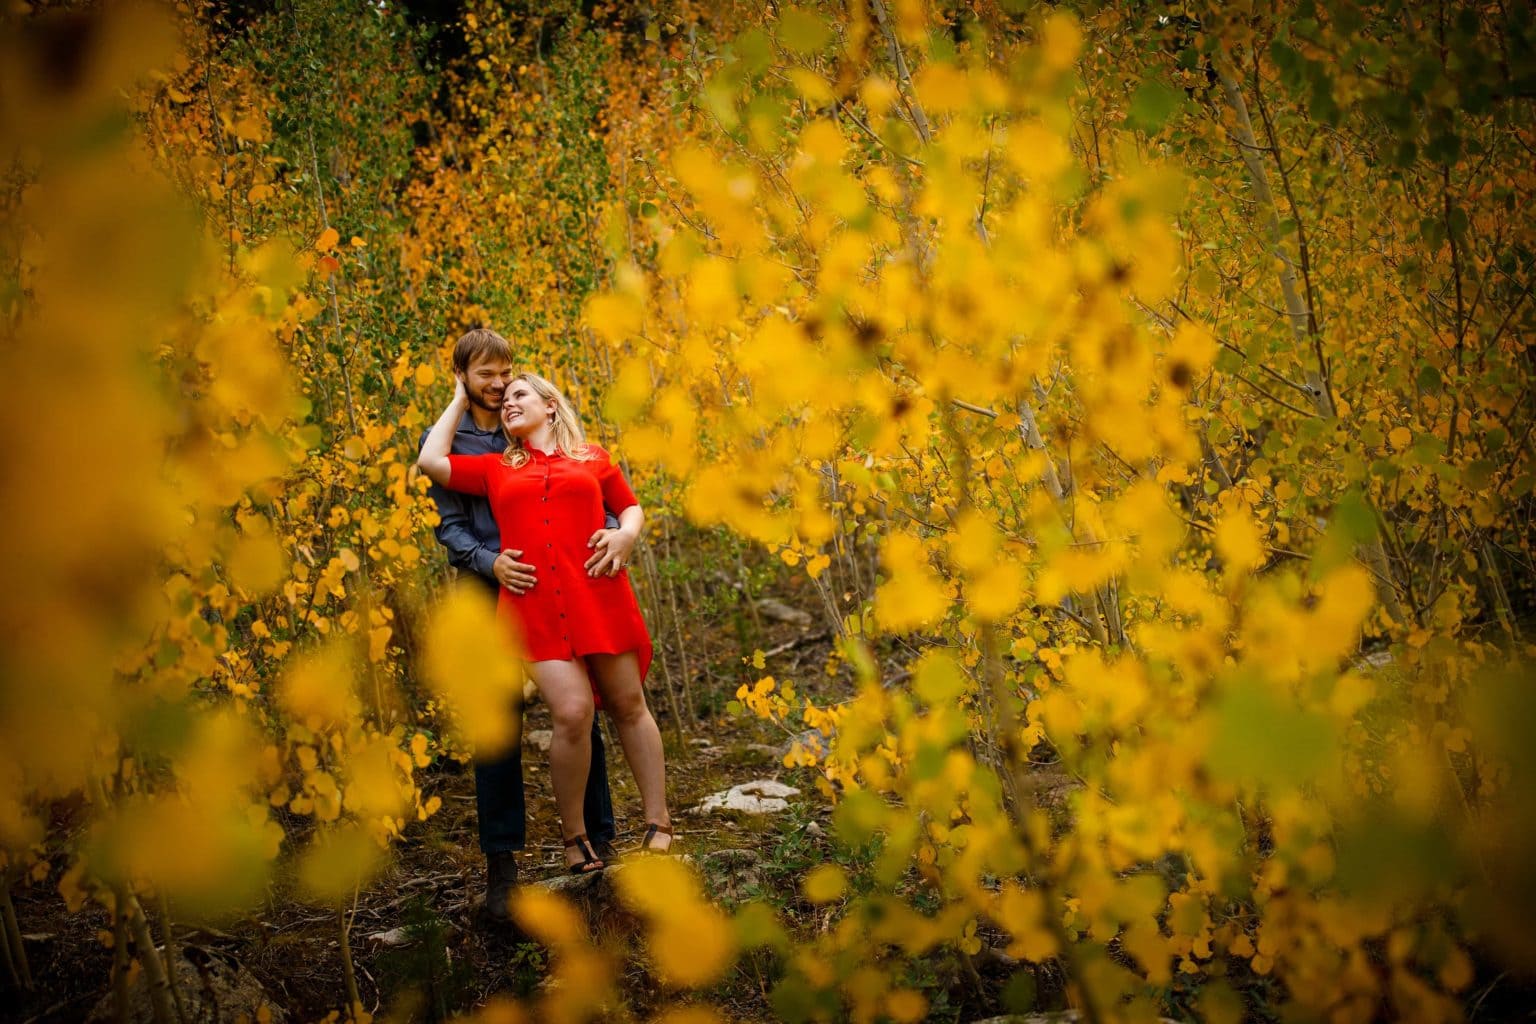 Joel and Coza share a moment together in a grove of aspen trees along Gap road in Golden Gate Canyon State Park during their fall Golden engagement